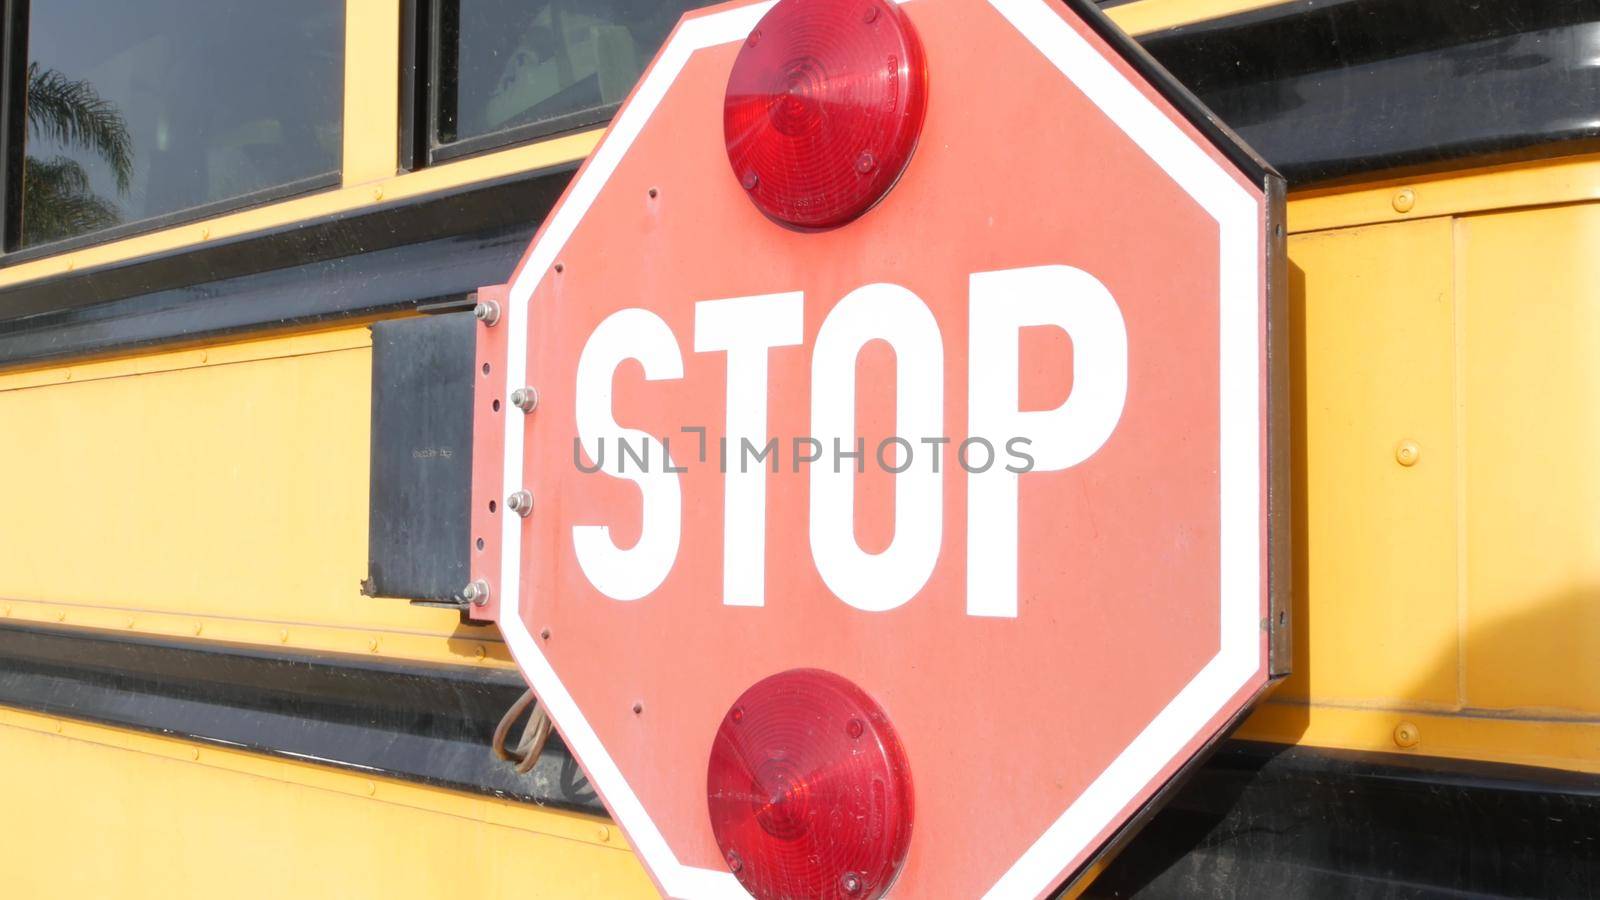 Red stop sign, yellow school bus in California, USA. Traffic warning on passenger schoolbus or shuttle in America. Public transportation safety on road. Caution or attention signage. Education concept